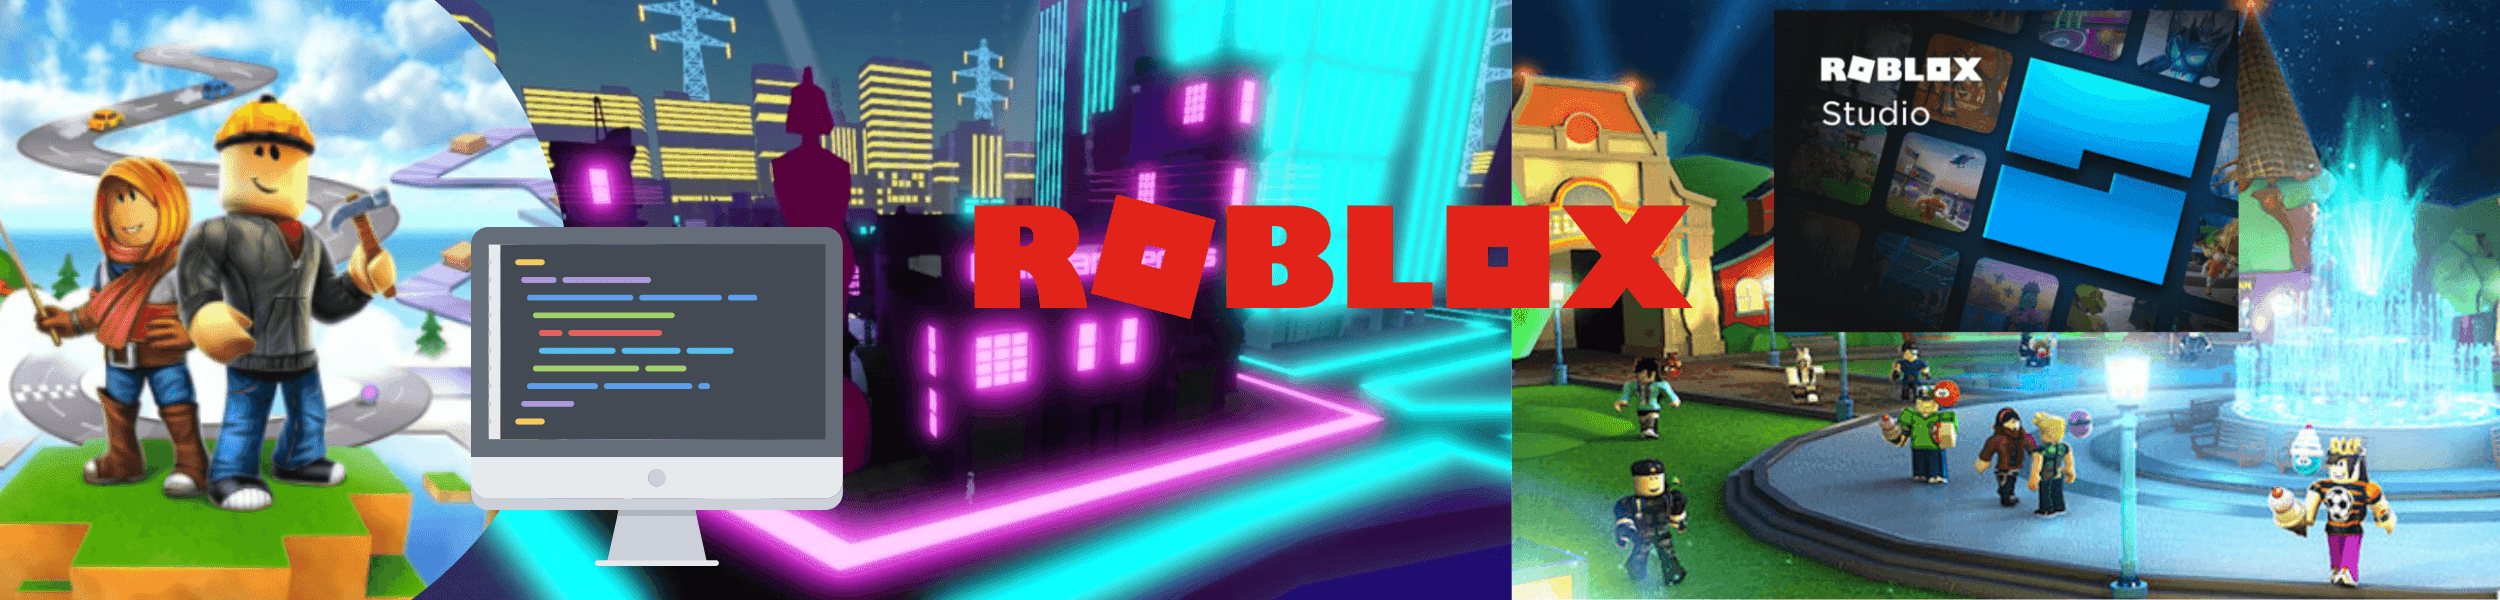 55% Discount for Online Roblox Trial Classes for Ages 9-19 Tickets,  Multiple Dates